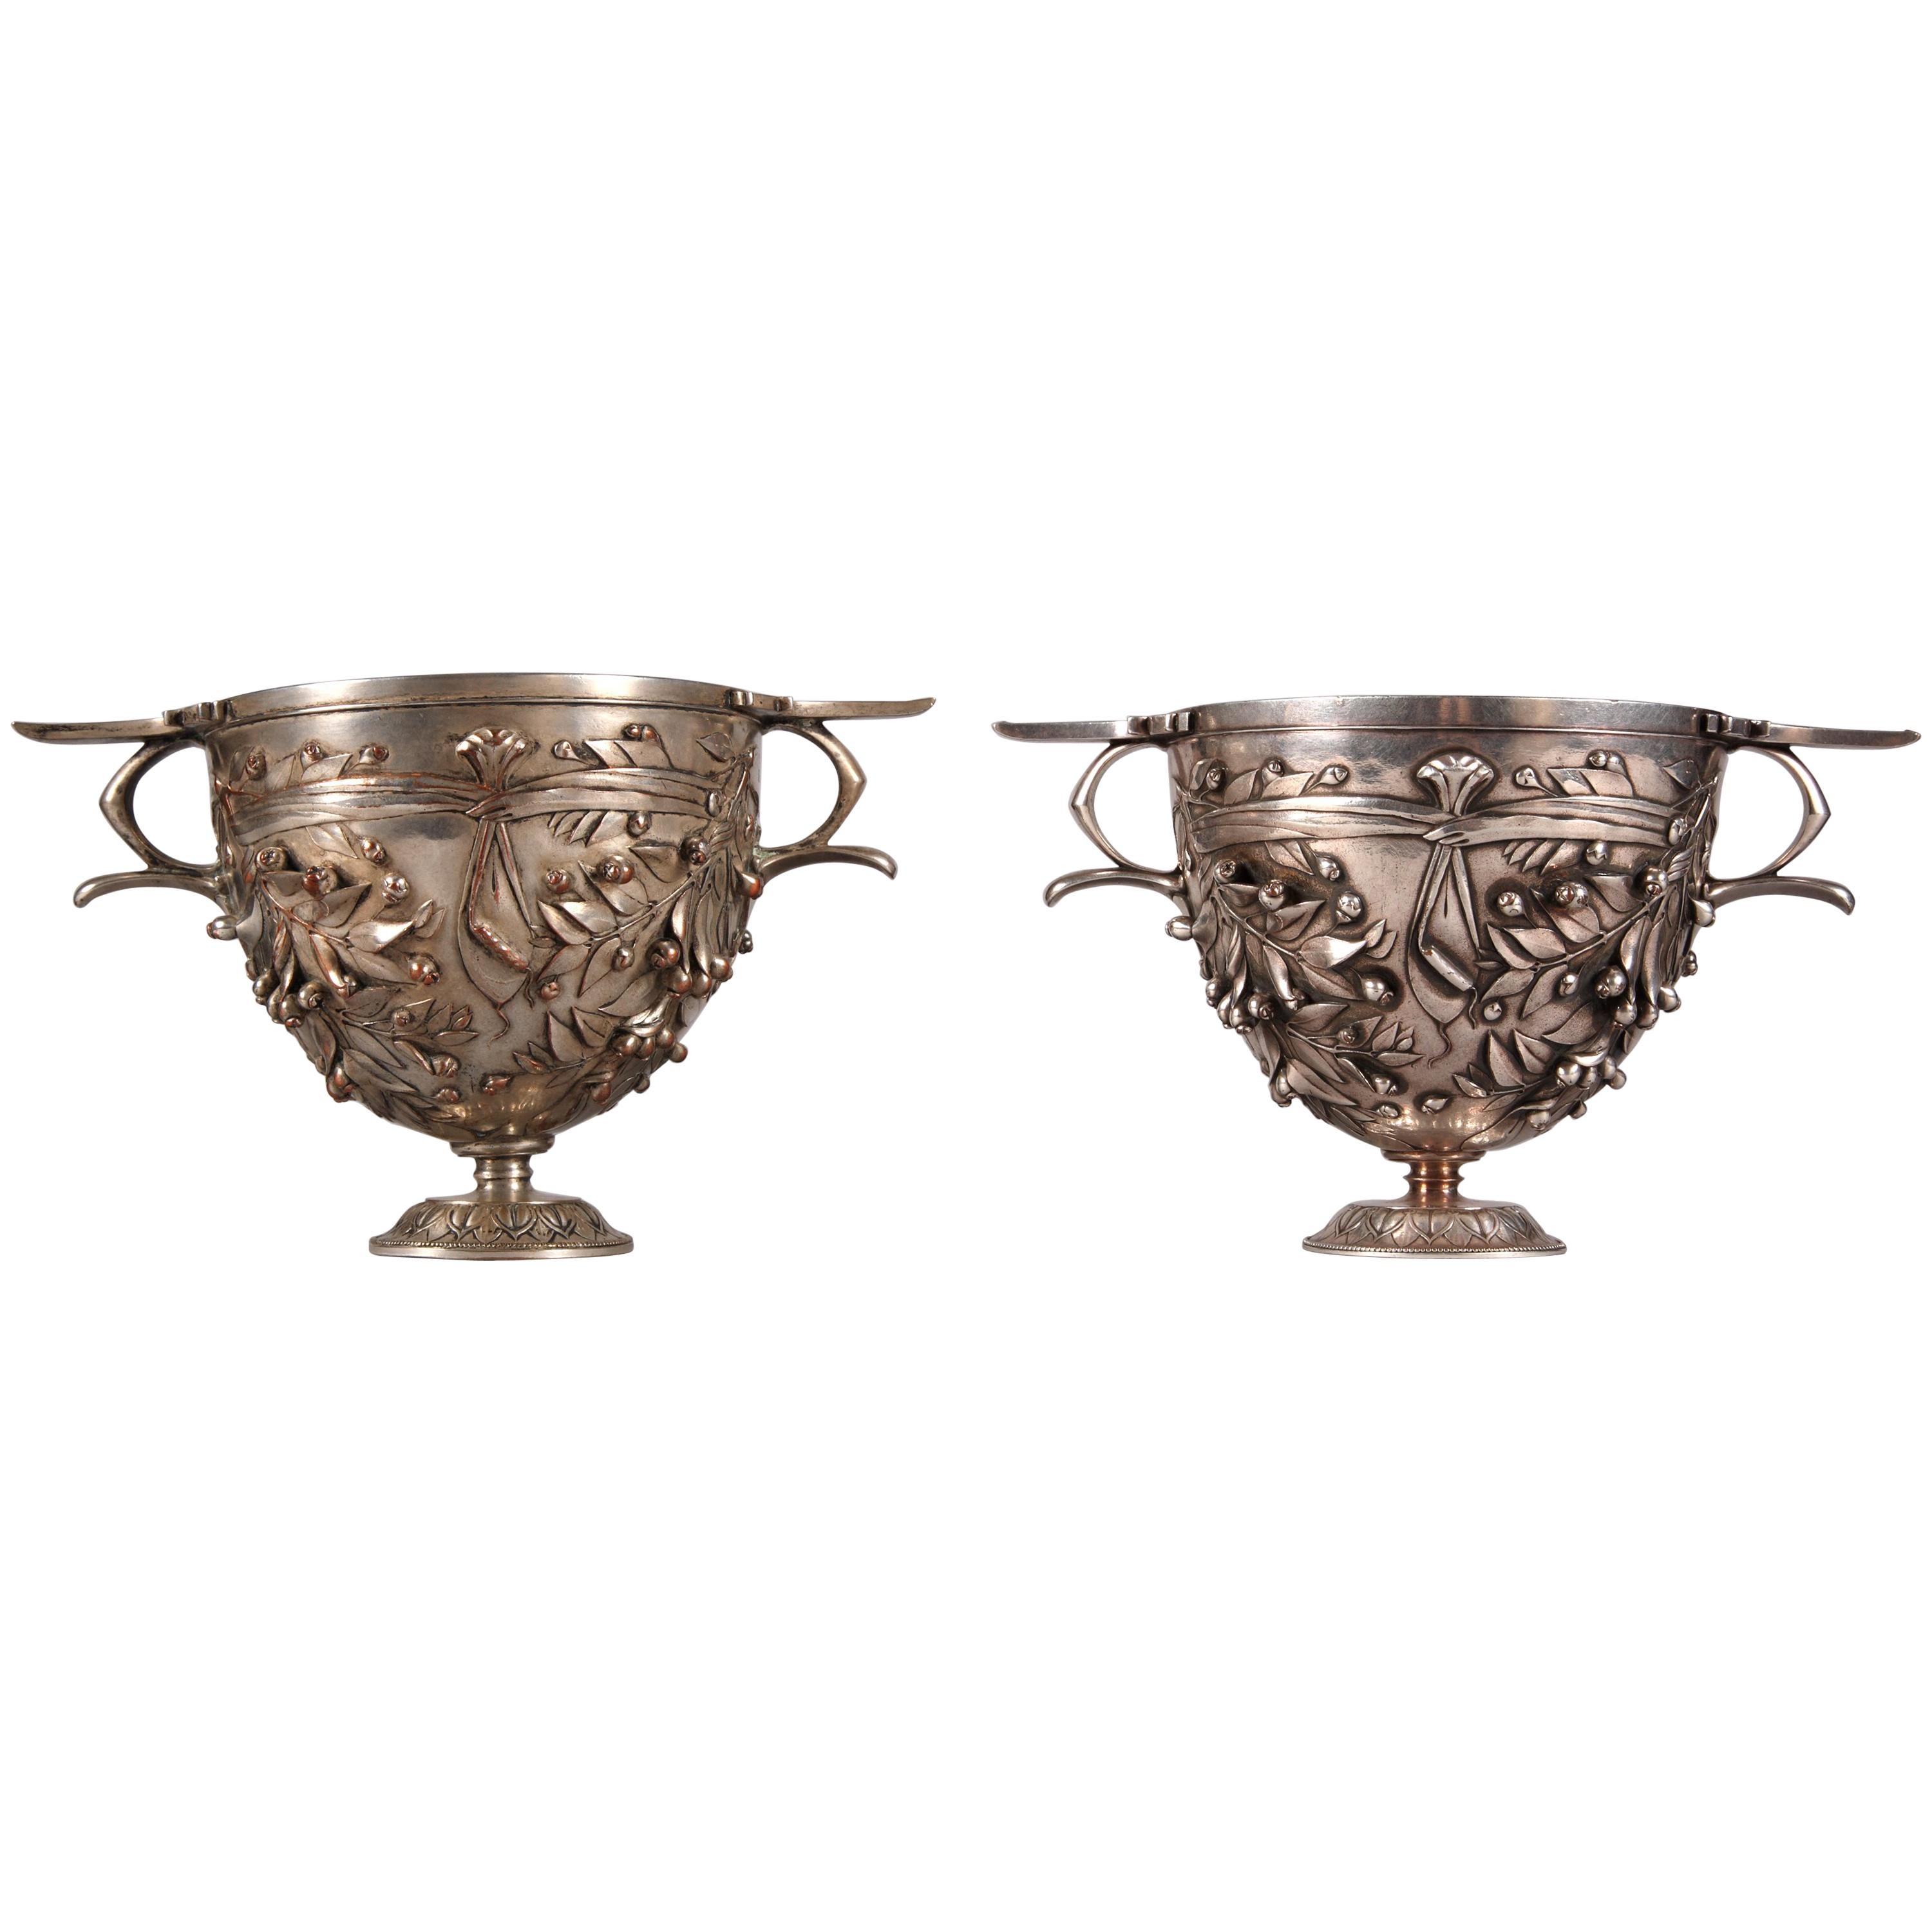 Pair of "Alesia" Cups by F. Barbedienne and D. Attarge, France, Circa 1878